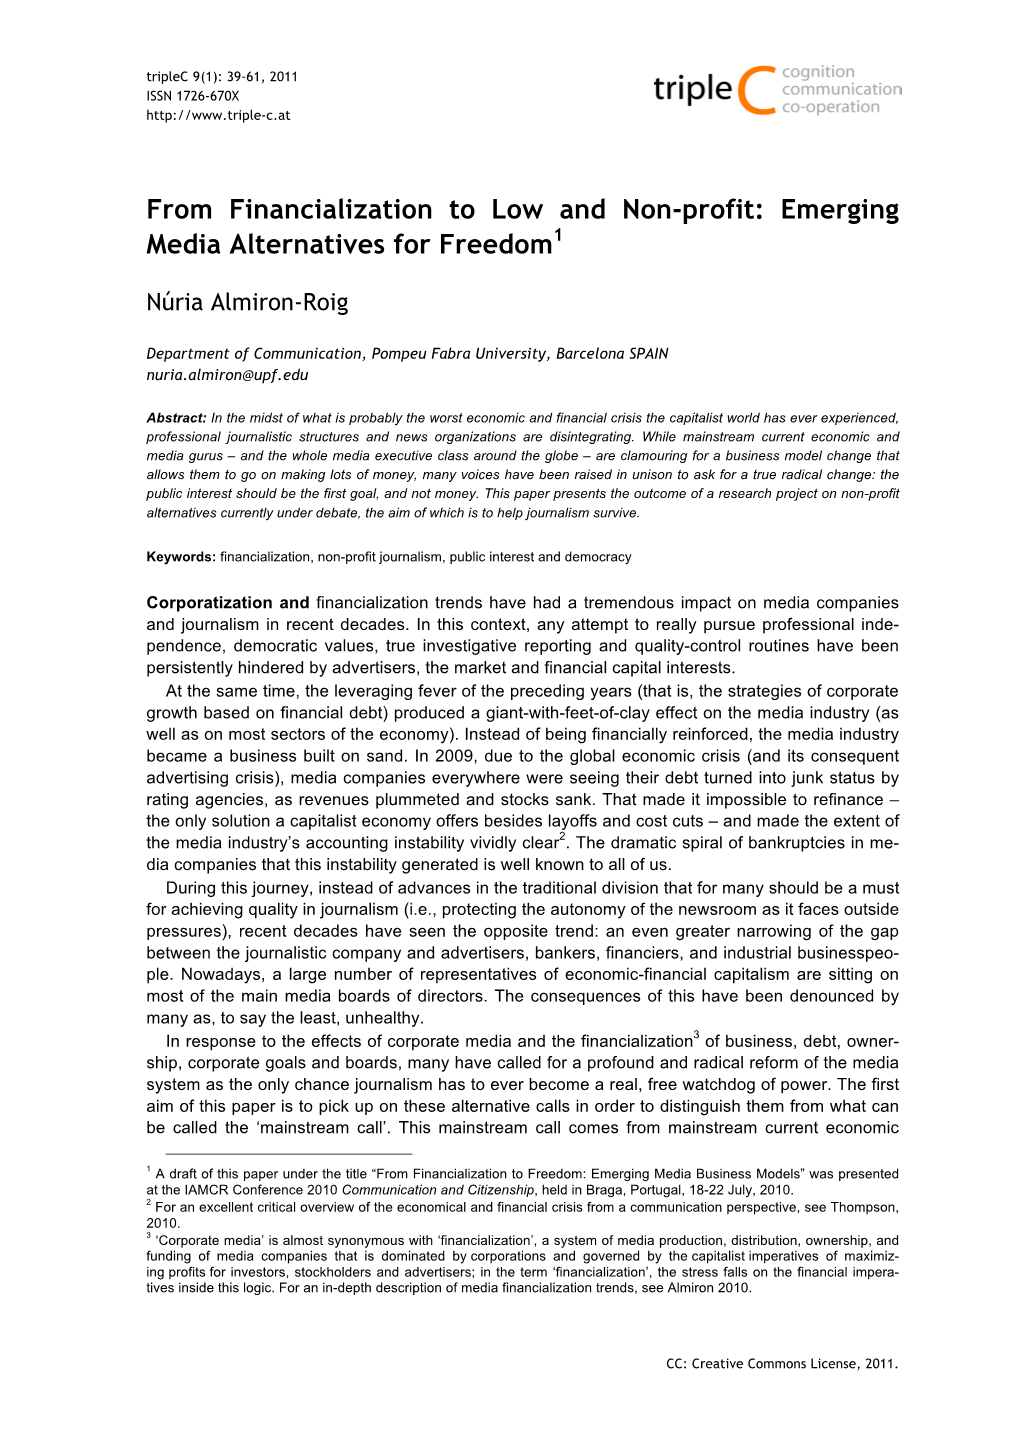 From Financialization to Low and Non-Profit: Emerging Media Alternatives for Freedom1